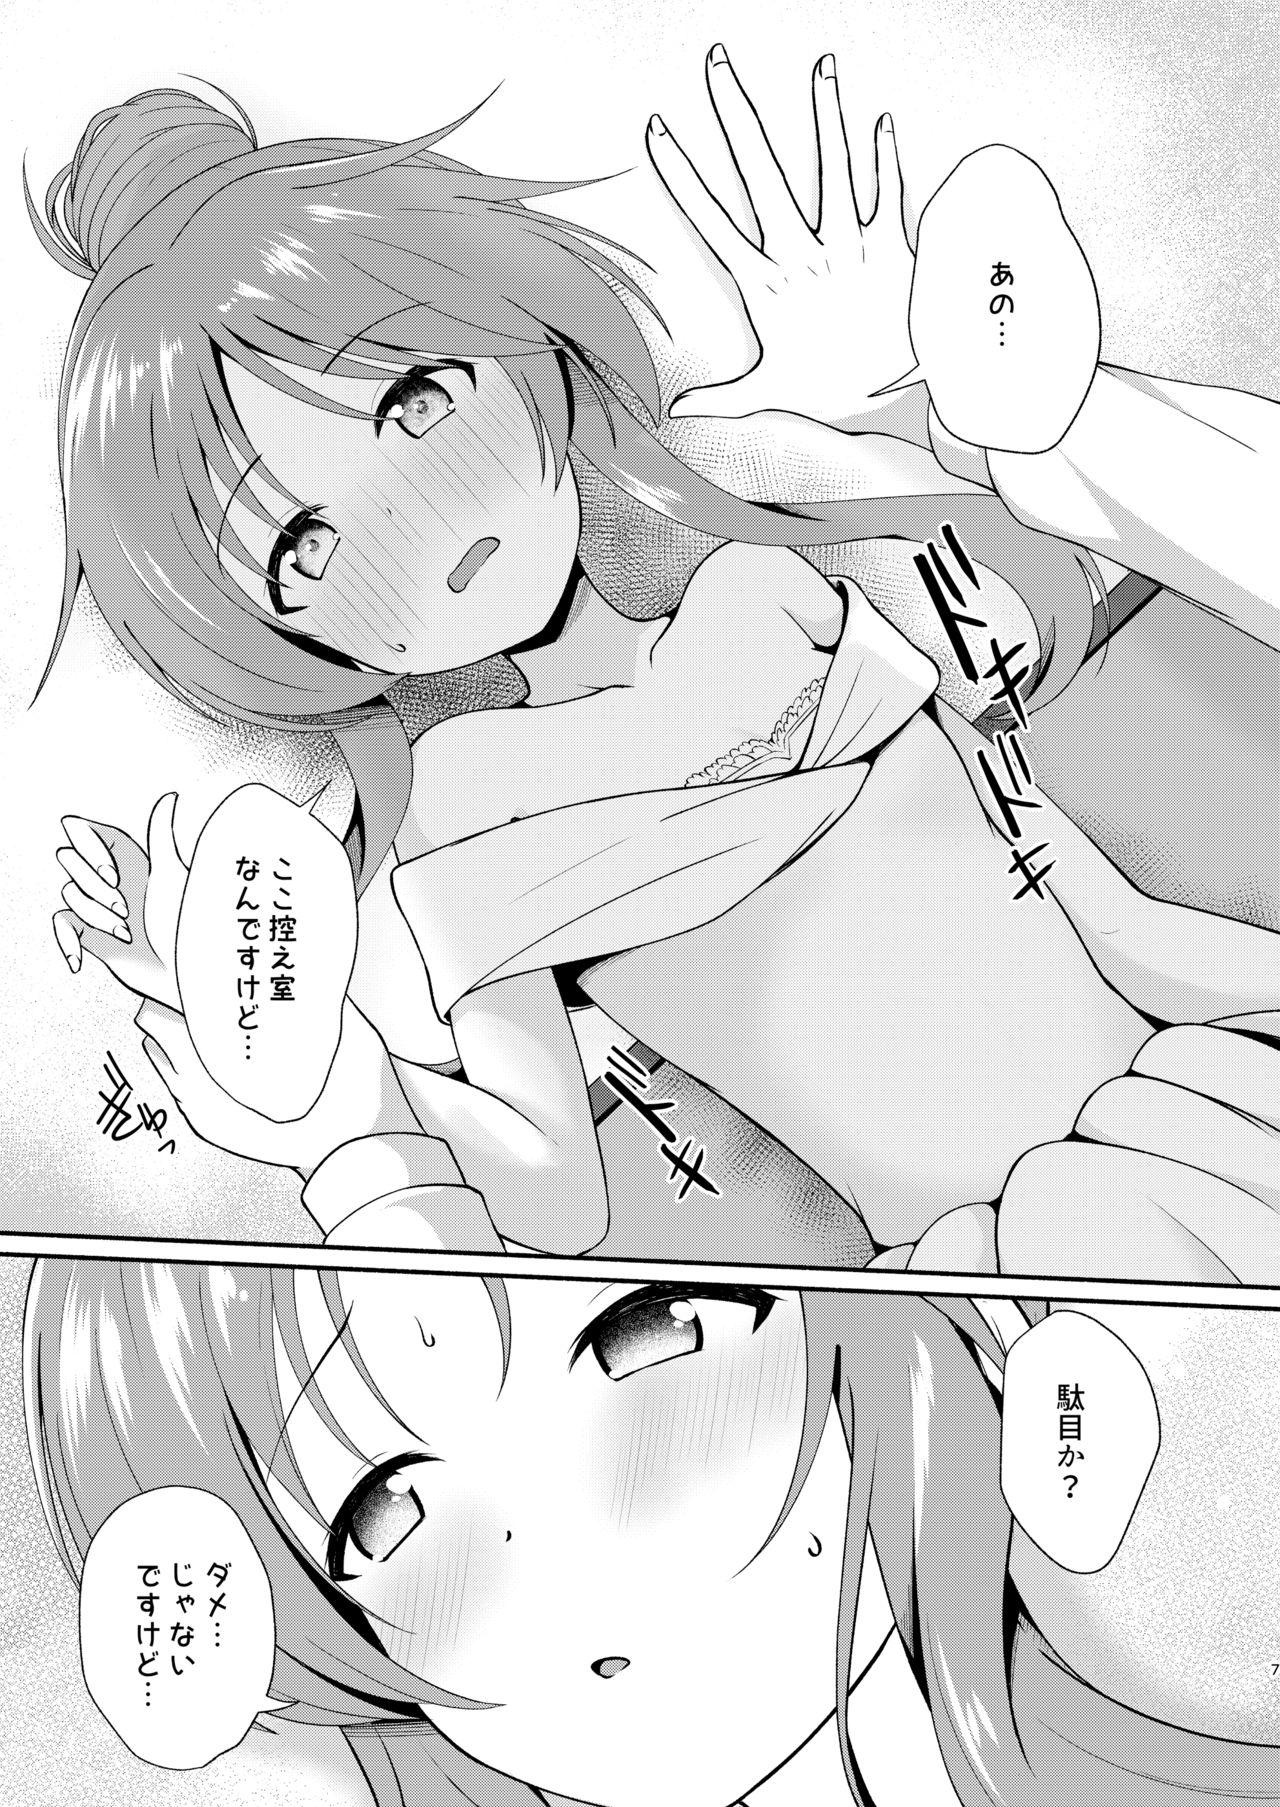 Naked Aiko Myu Endless 8 - The idolmaster Little - Page 7